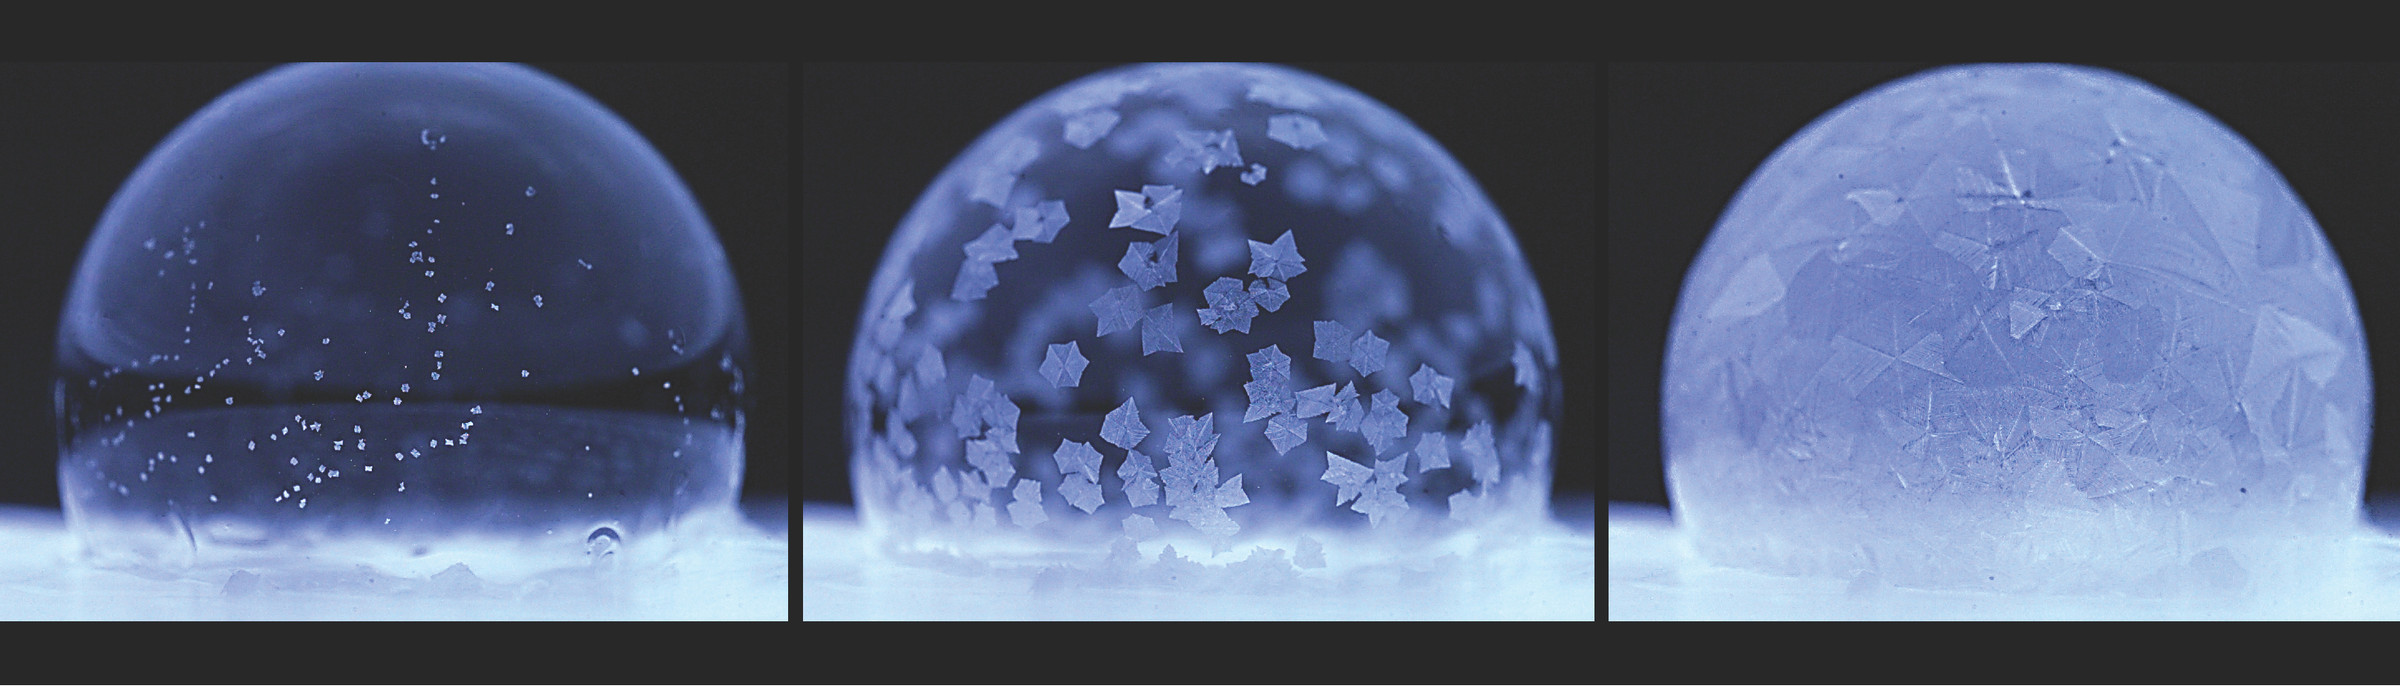 Three images showing three blue soap bubbles in different stages of freezing. To the far left, the bubble has tiny specks. In the middle, the bubble is dotted with larger ice crystals. To the right, the bubble appears frozen solid. 